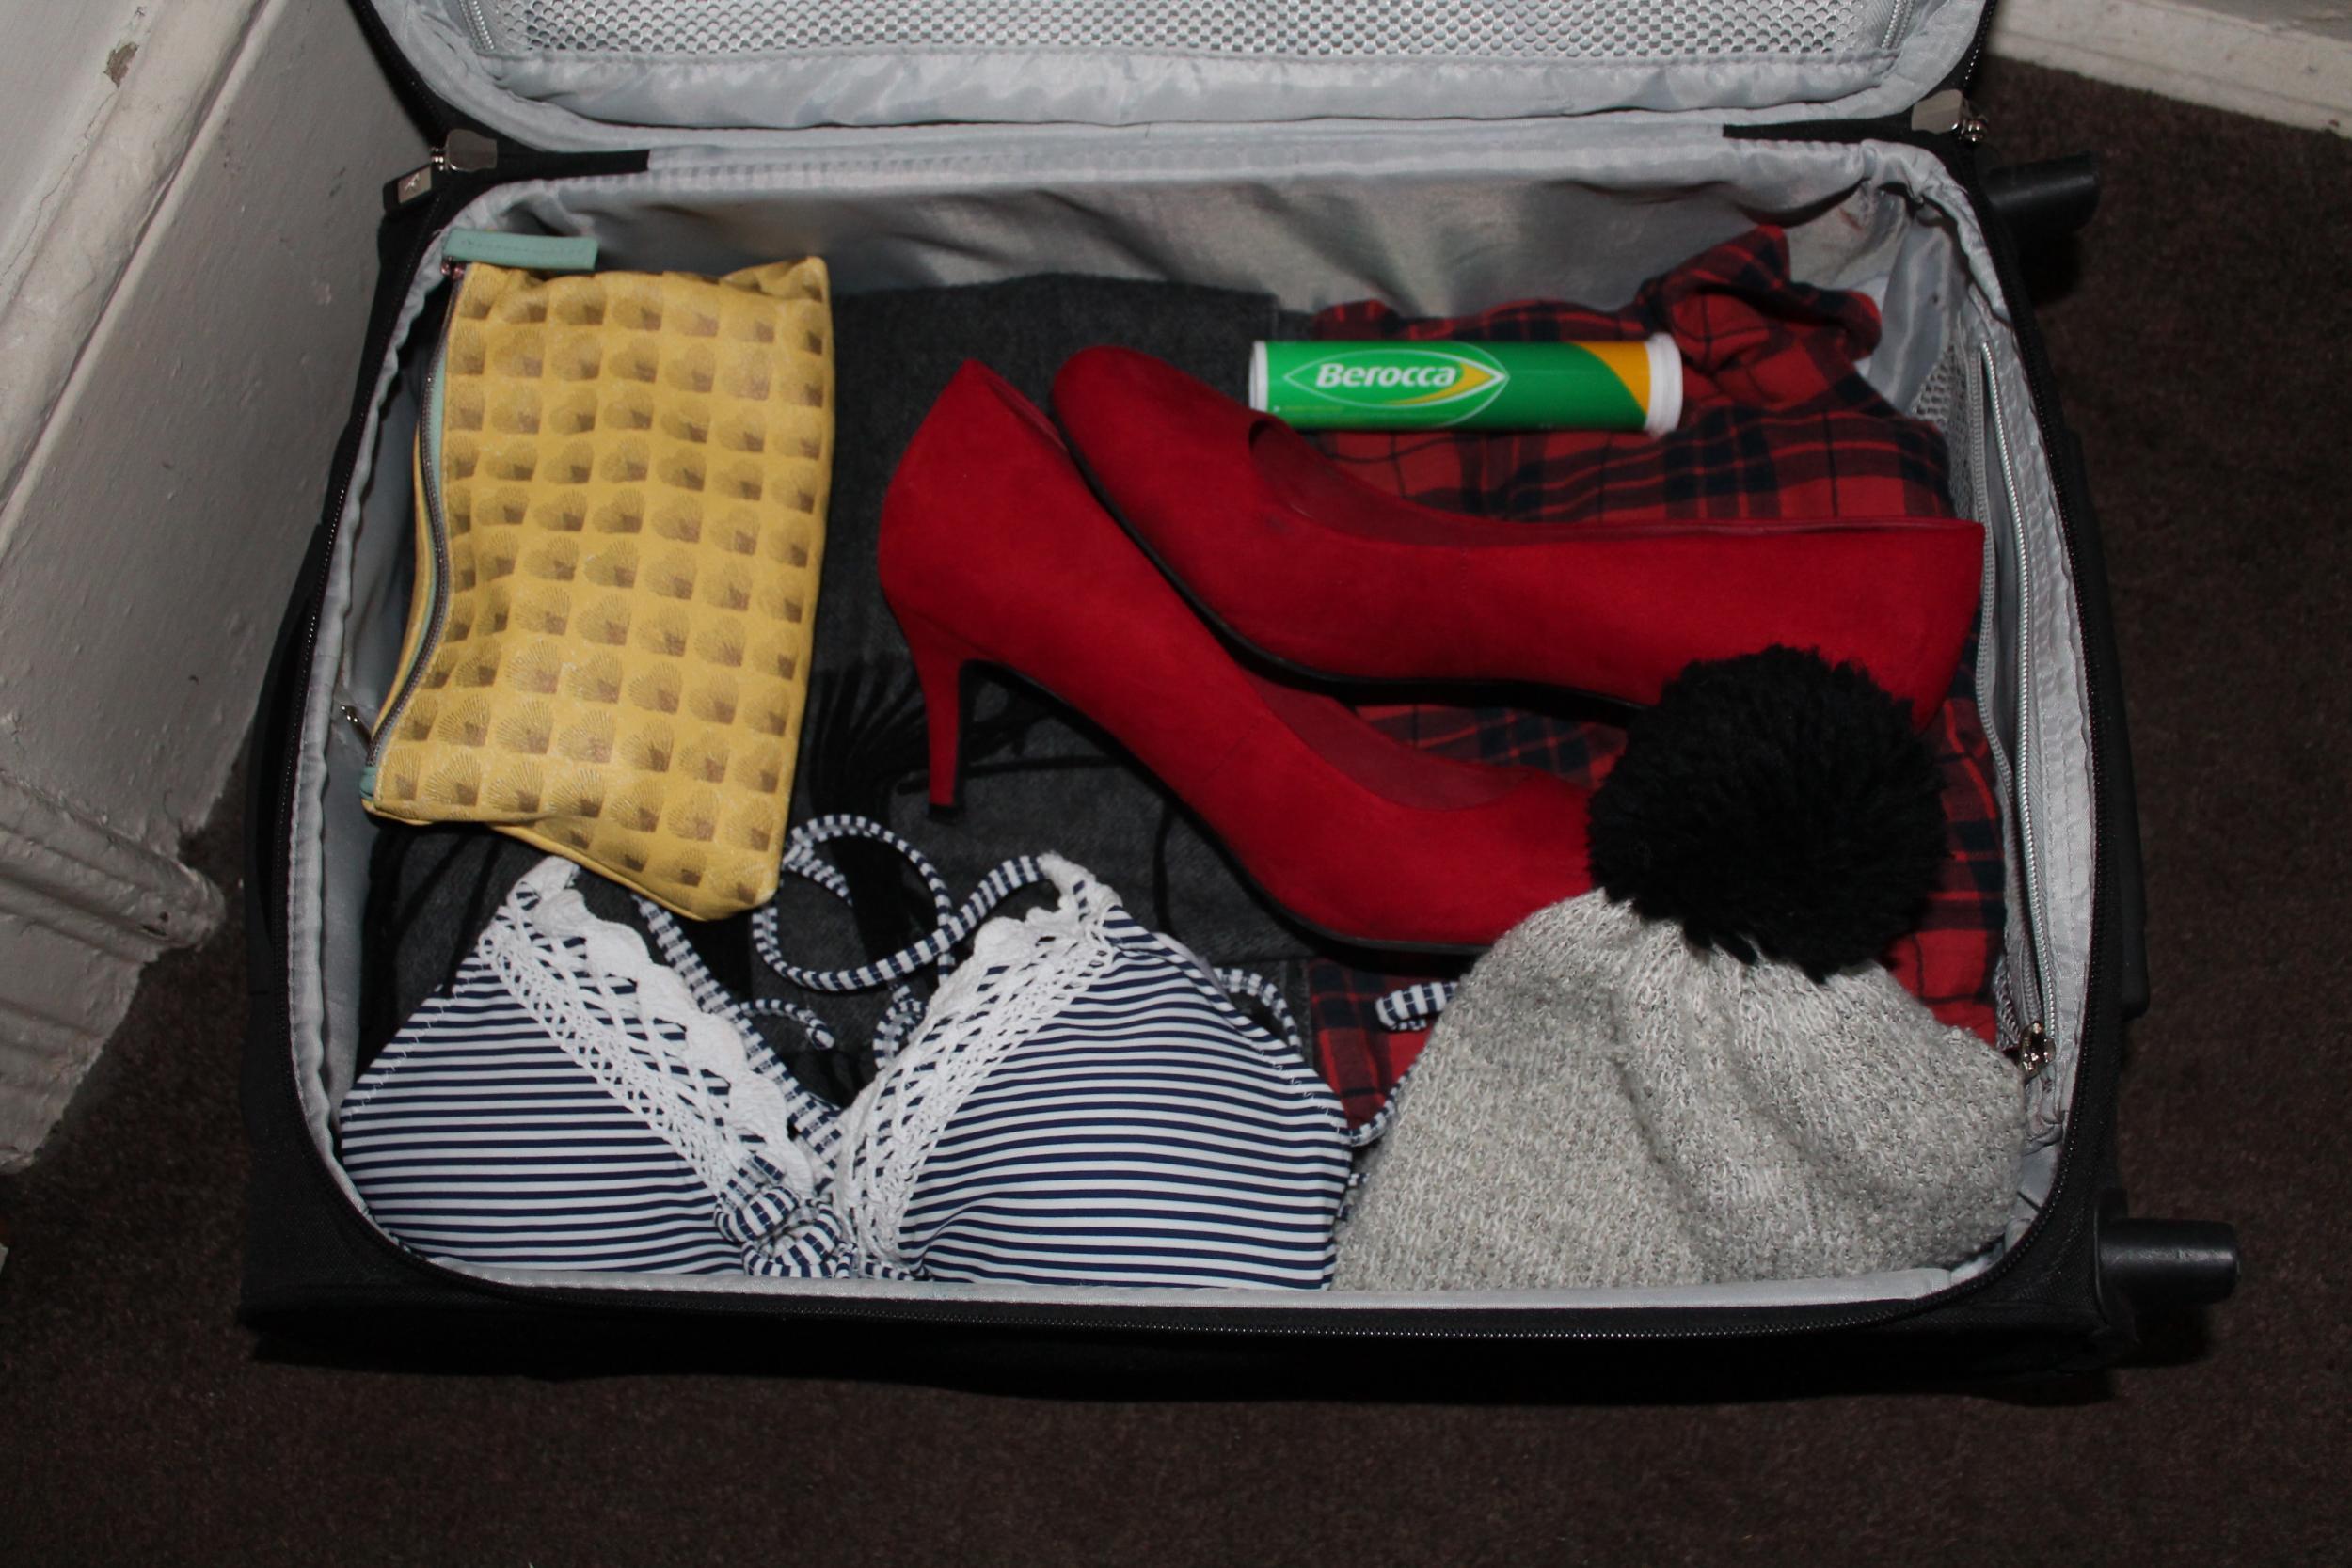 What to pack for a secret weekend away? Bikini, woolly hat and high heels